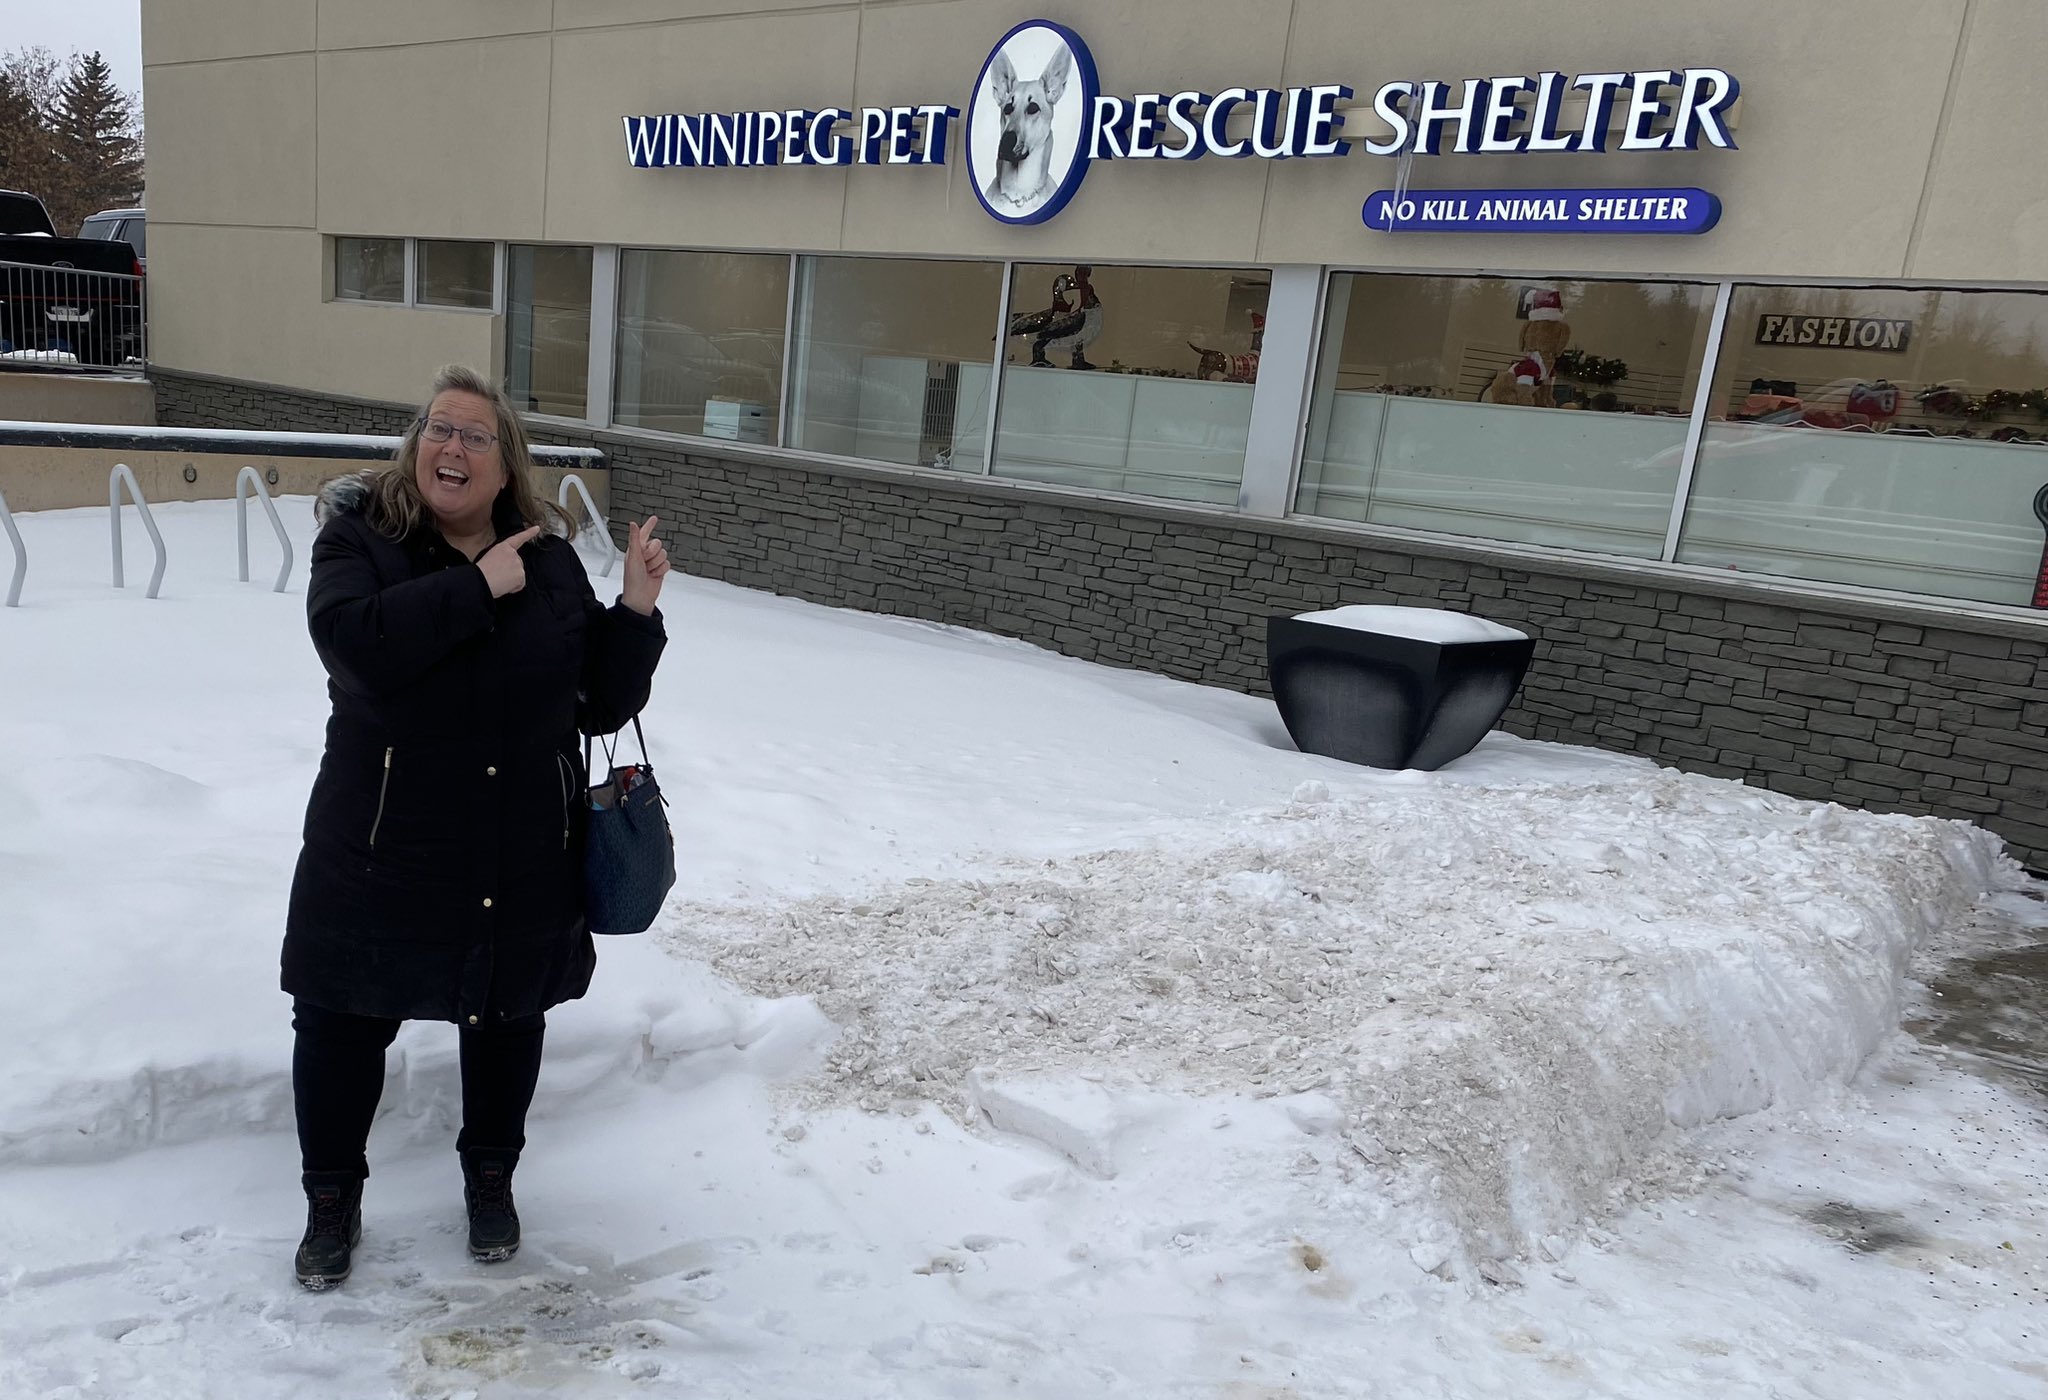 Winnipeg's Bounce 99.9 on X: It's a great day to check out the Open House  at the new location of the Winnipeg Pet Rescue Shelter at 2727 Portage  Avenue. Come see them